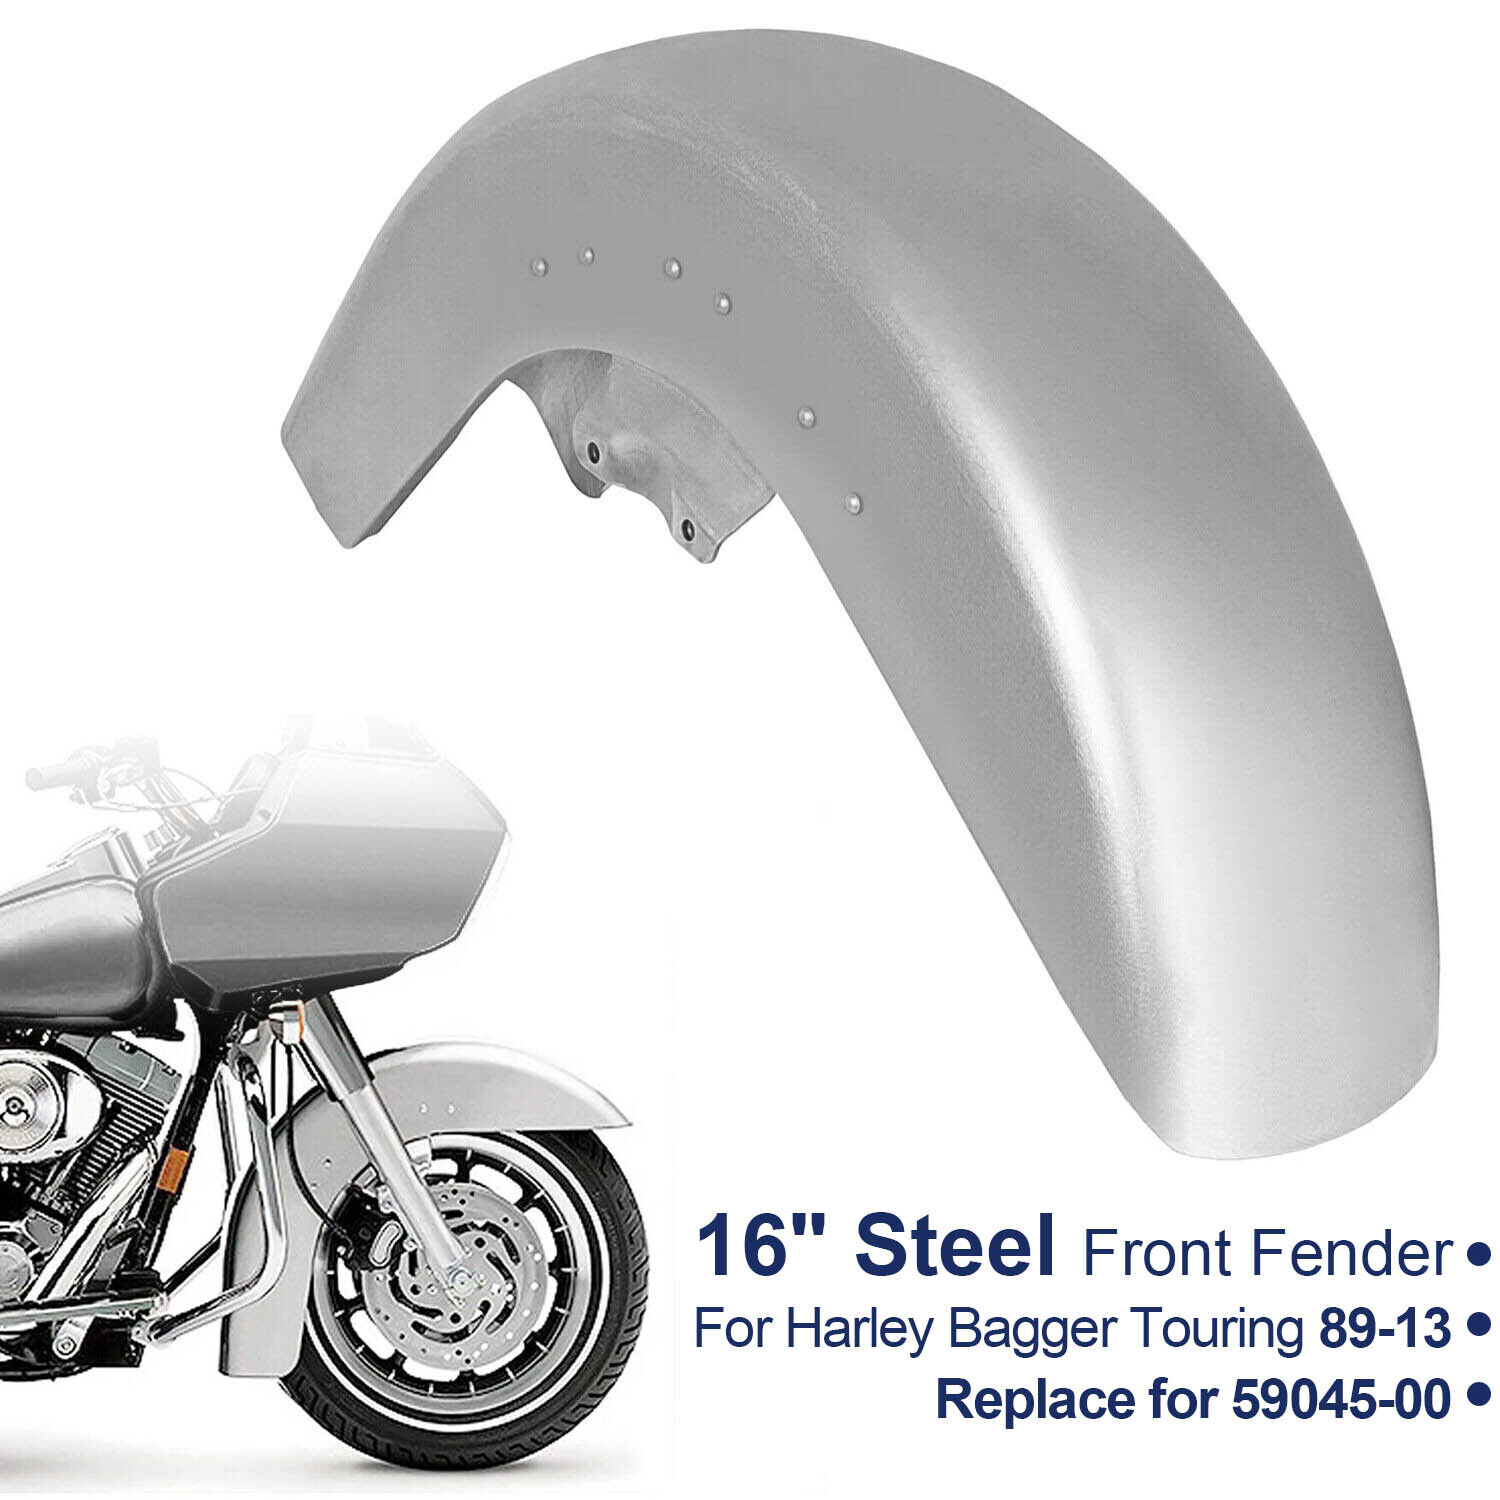 Steel Front Fender For Harley Bagger Touring 89-13 Street Electra Glide Smooth